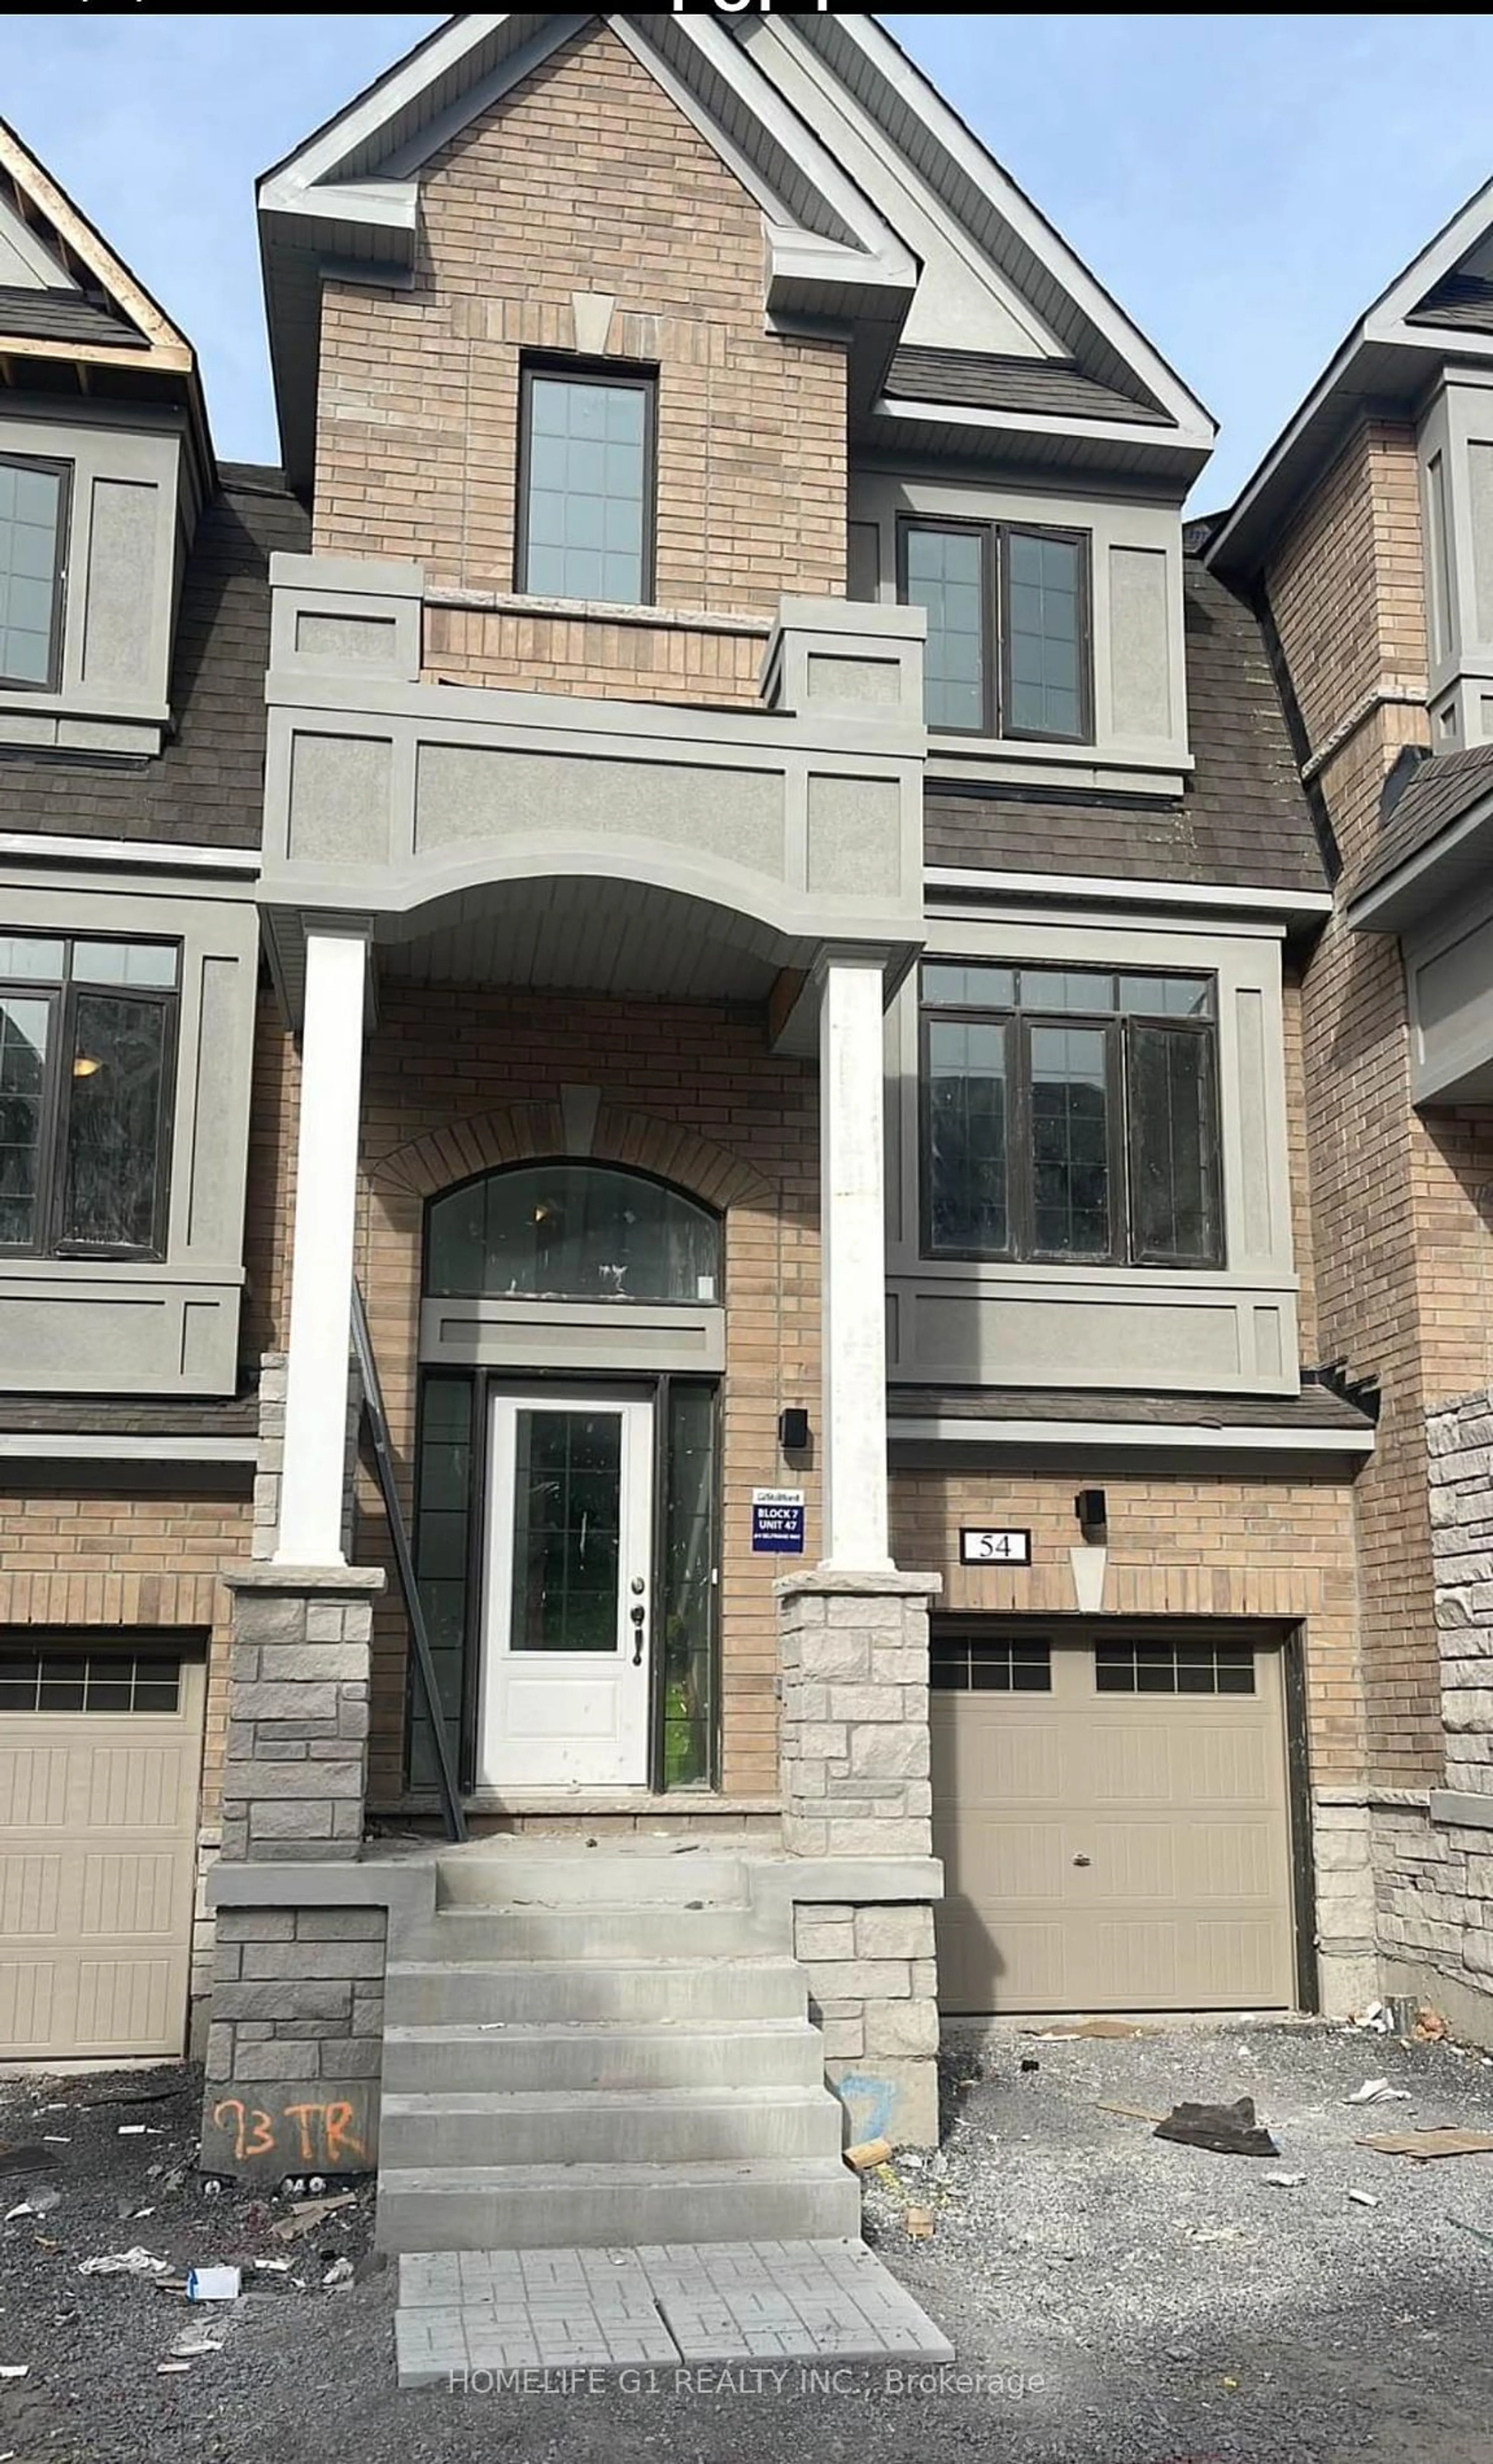 Home with brick exterior material for 54 Selfridge Way, Whitby Ontario L1N 0N9